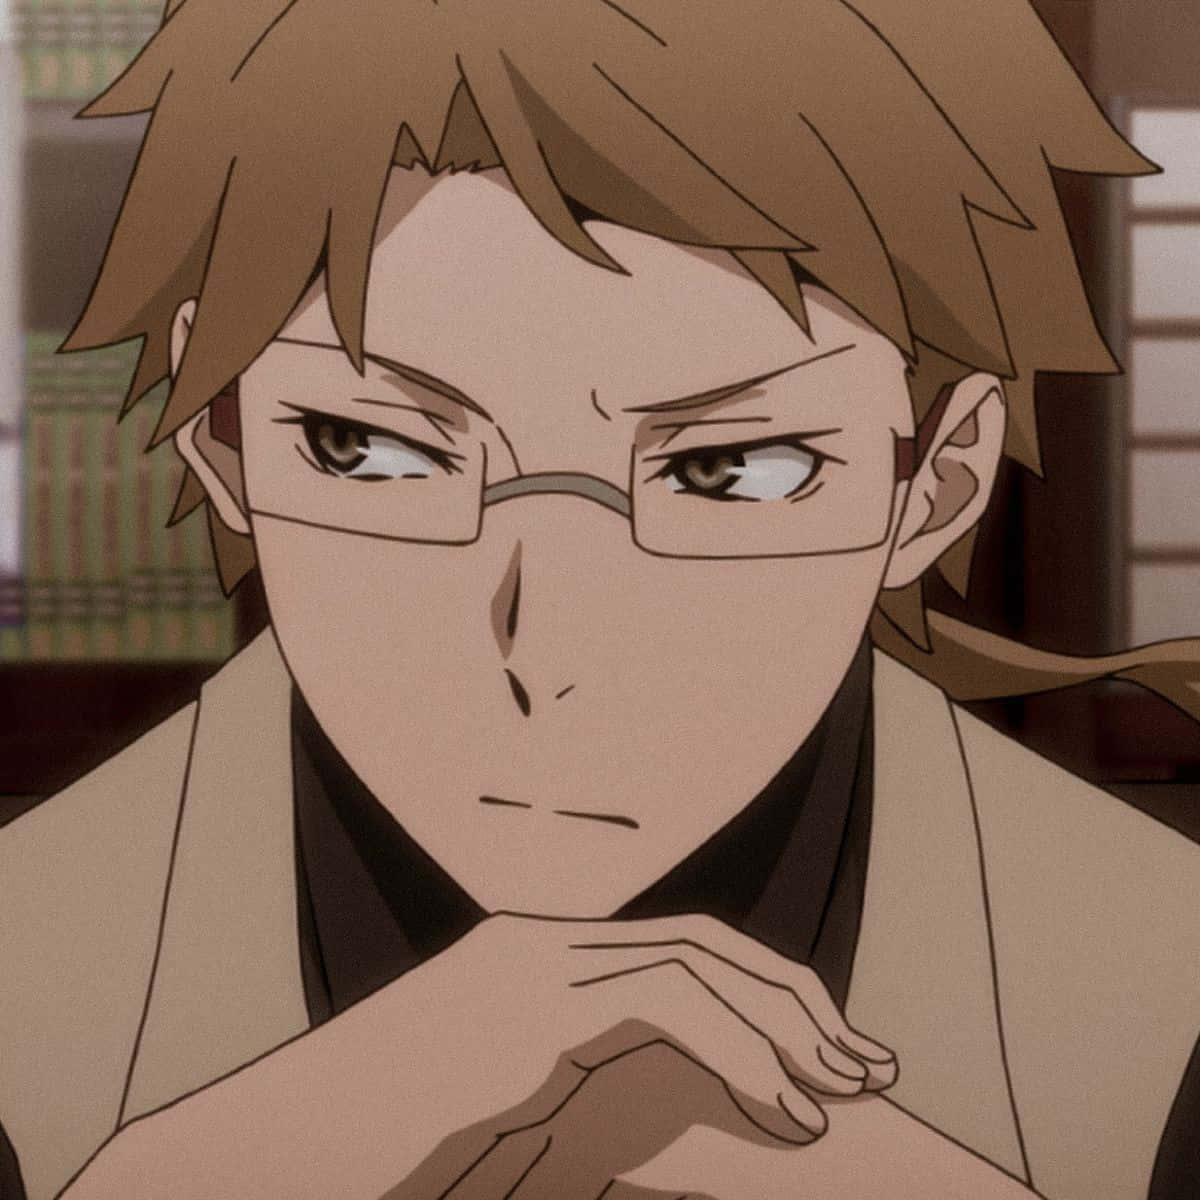 Kunikida Doppo looking back with a serious expression Wallpaper